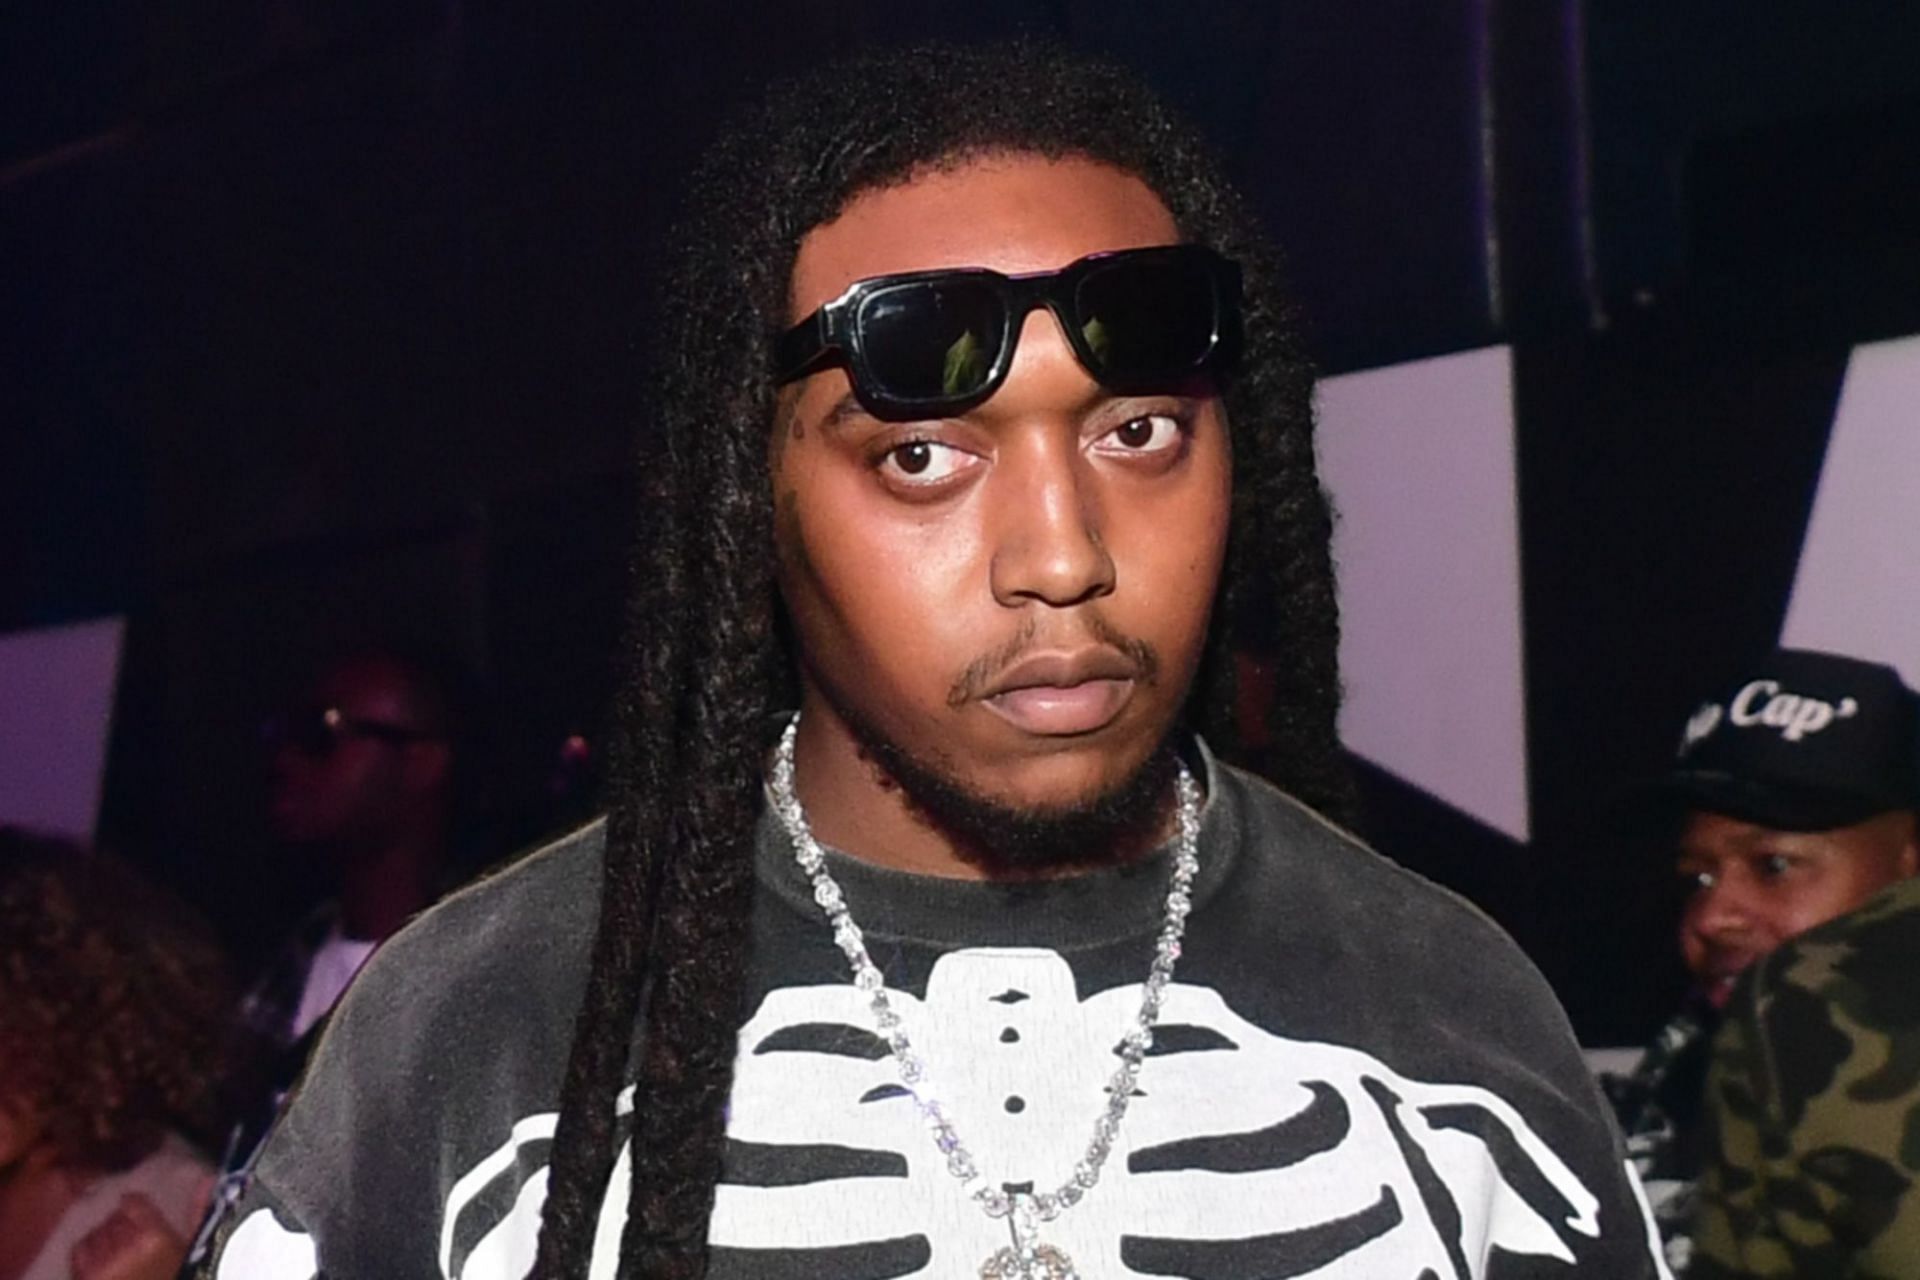 Migos member Takeoff fatally shot in Houston (Image via Getty Images)